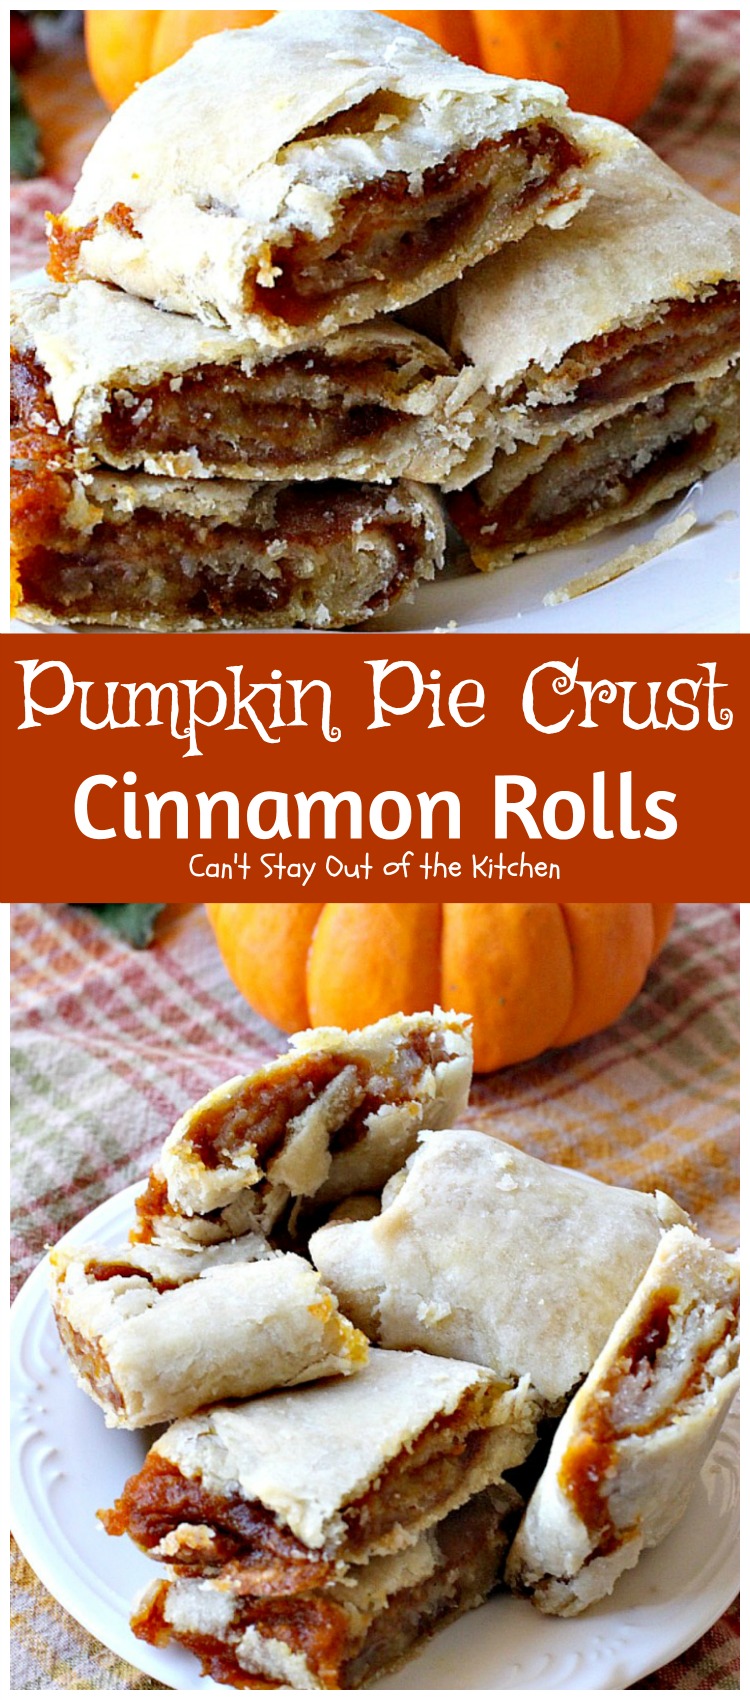 Pumpkin Pie Crust Cinnamon Rolls | Can't Stay Out of the Kitchen